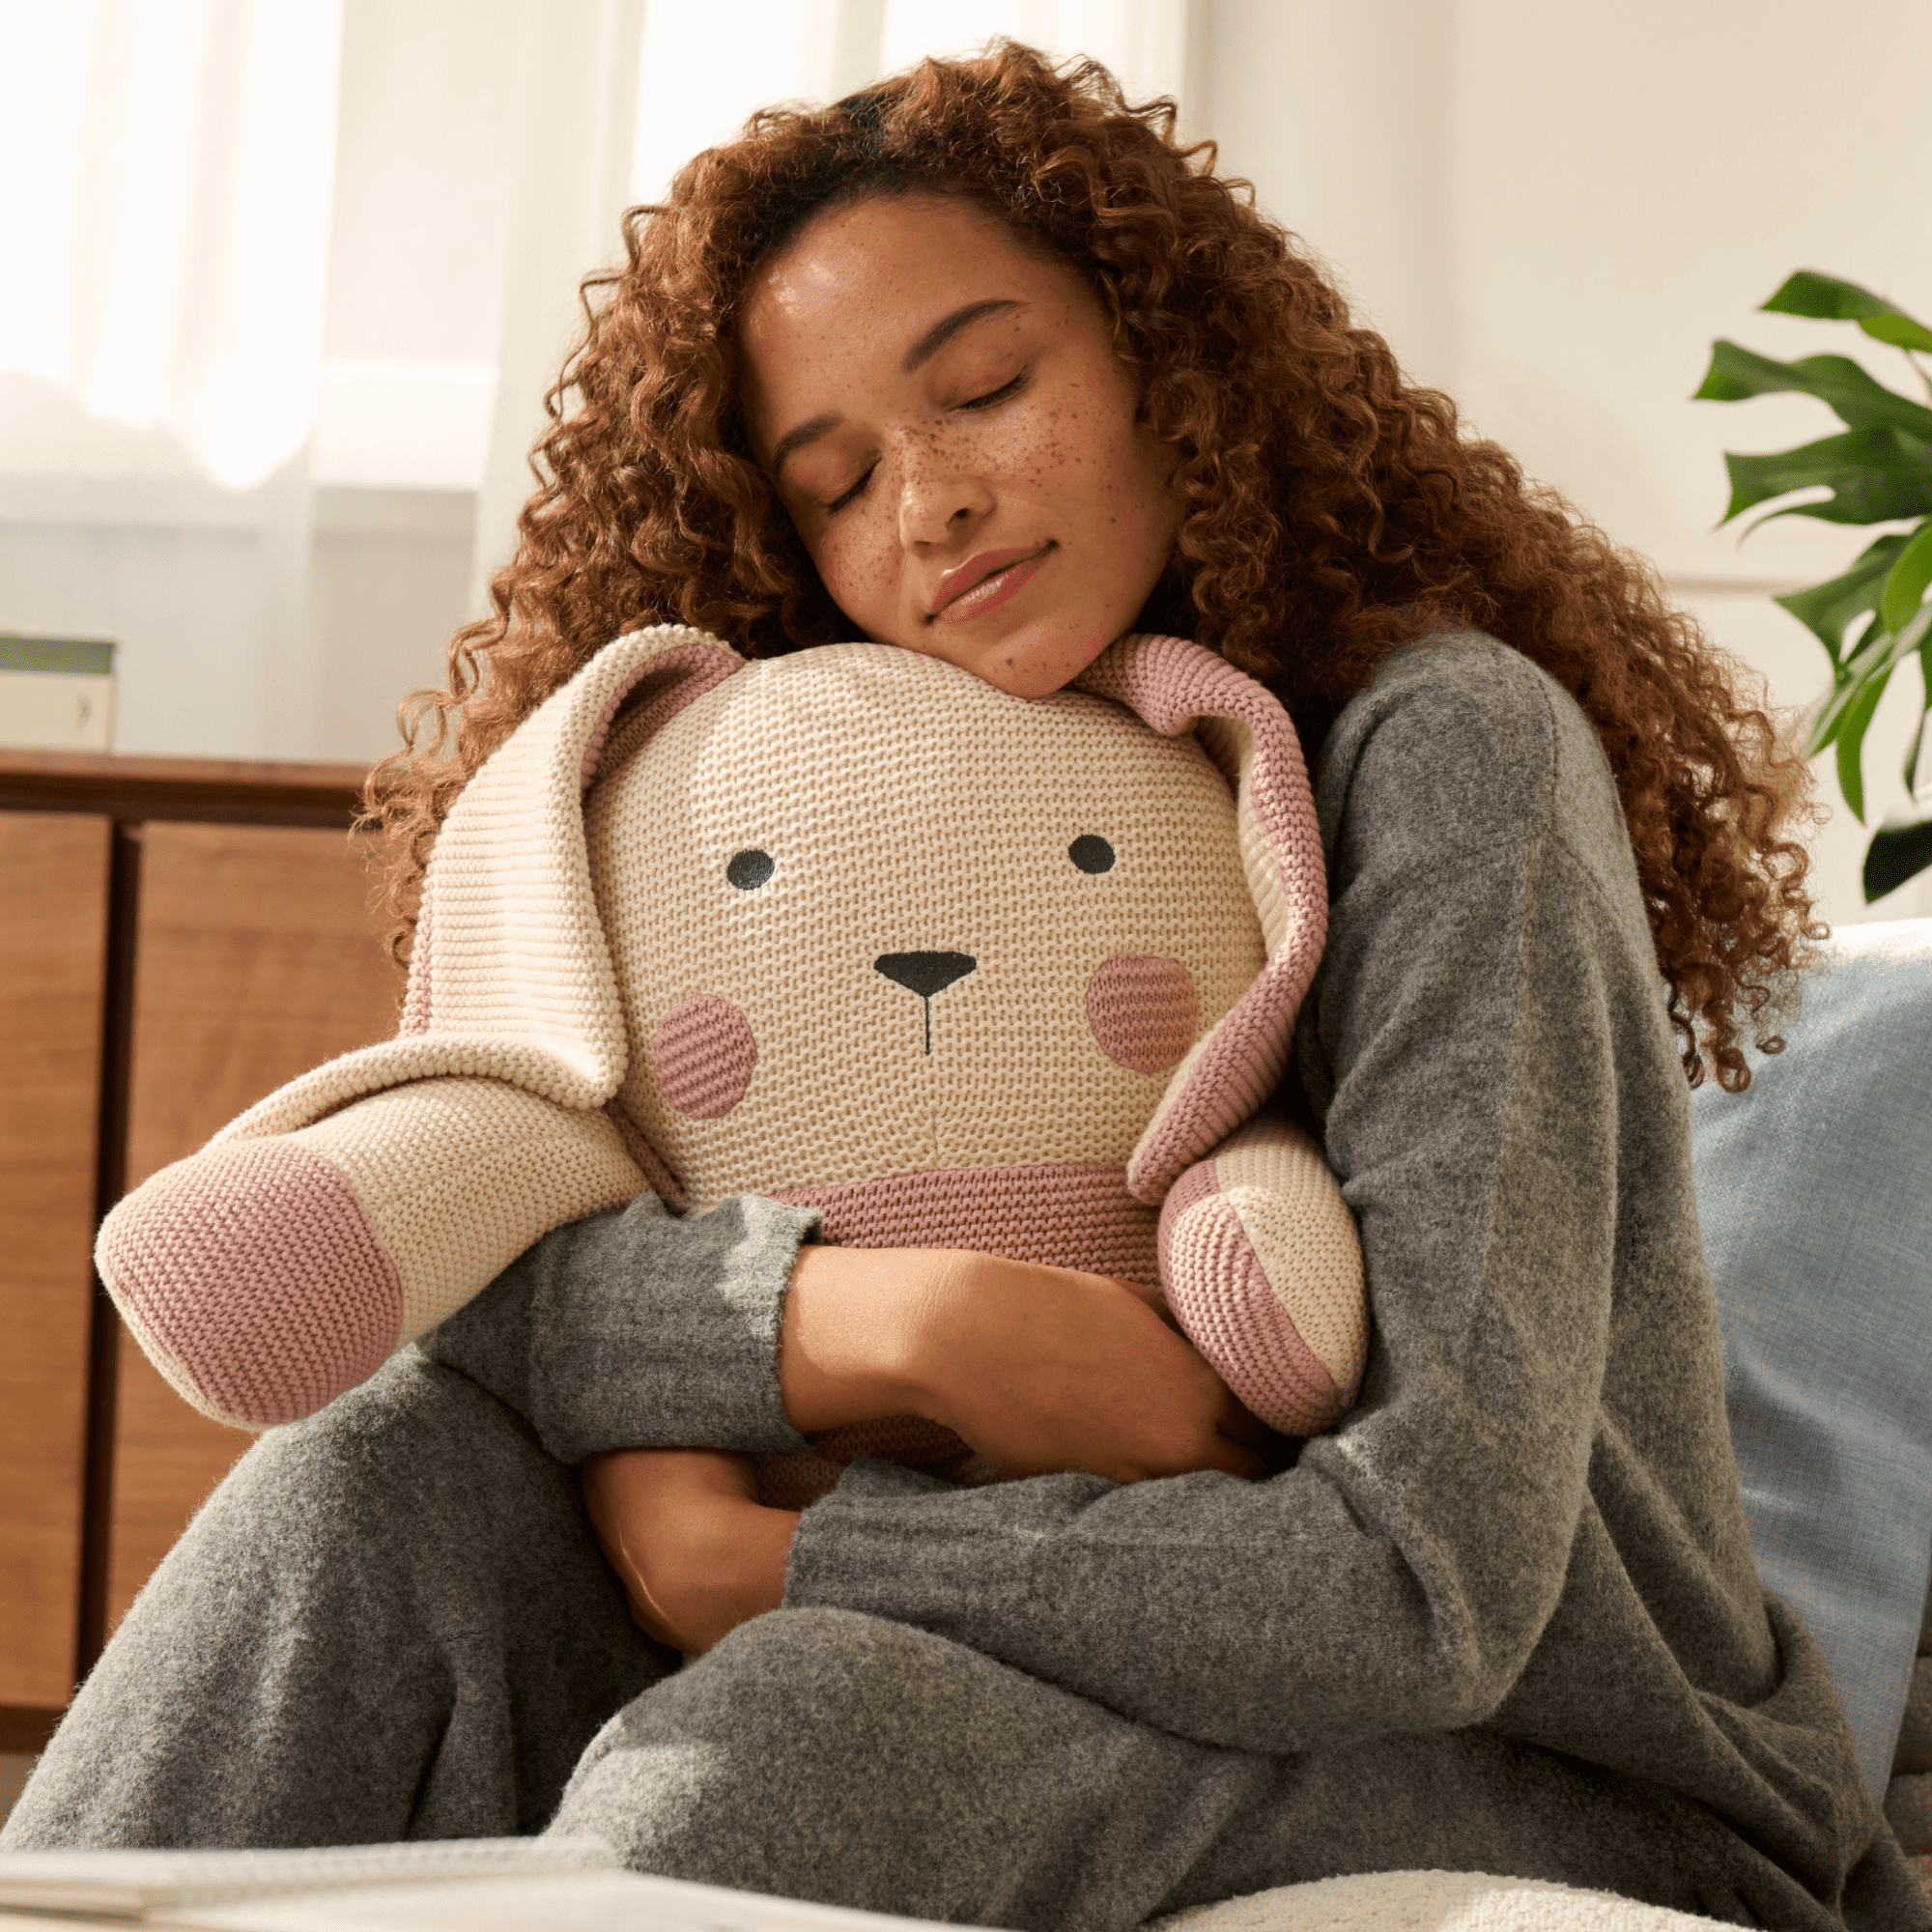 Do Weighted Stuffed Animals Help With Anxiety?